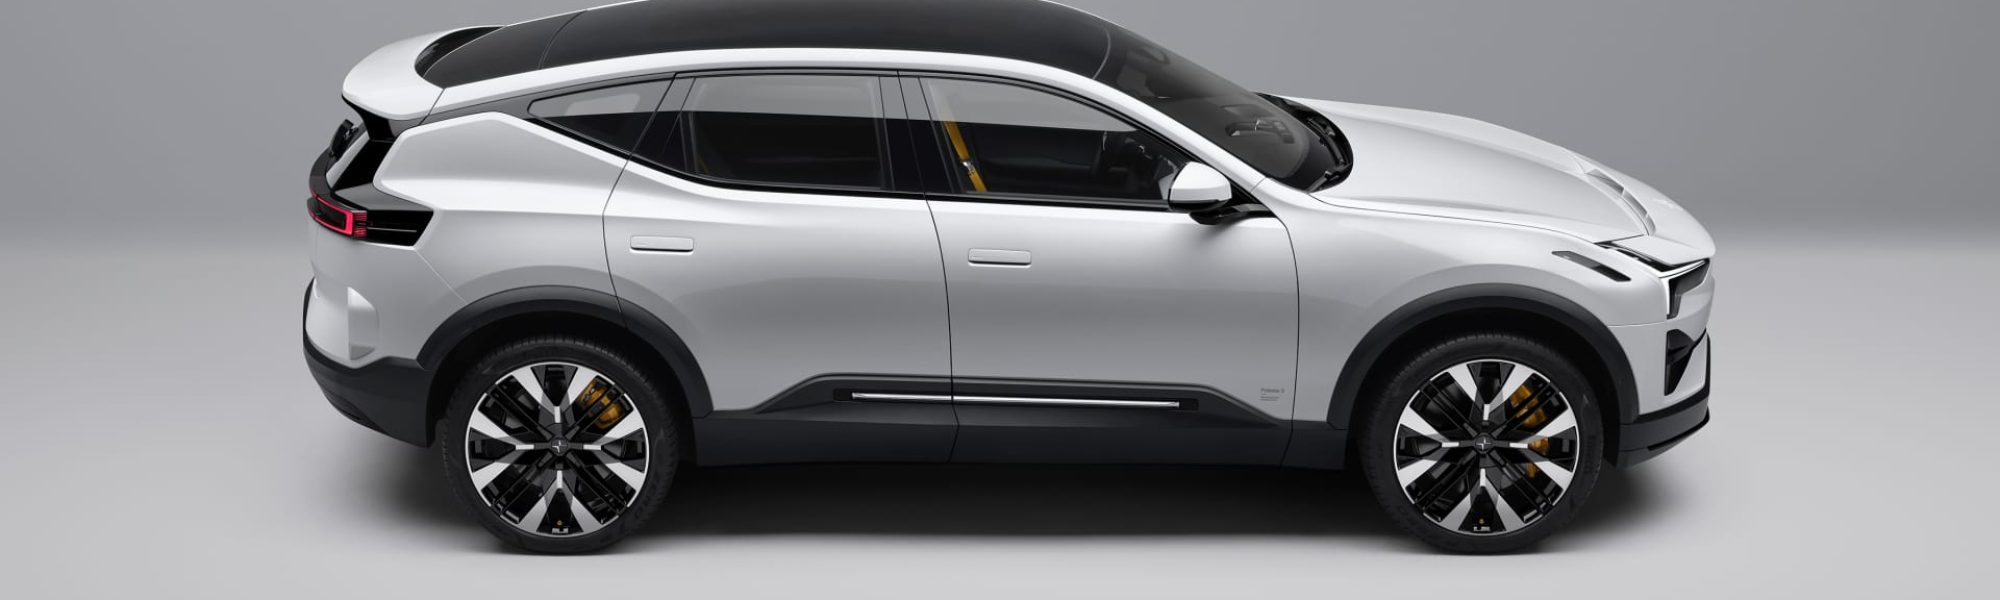 Polestar confirms it will deliver 50,000 electric vehicles in 2022